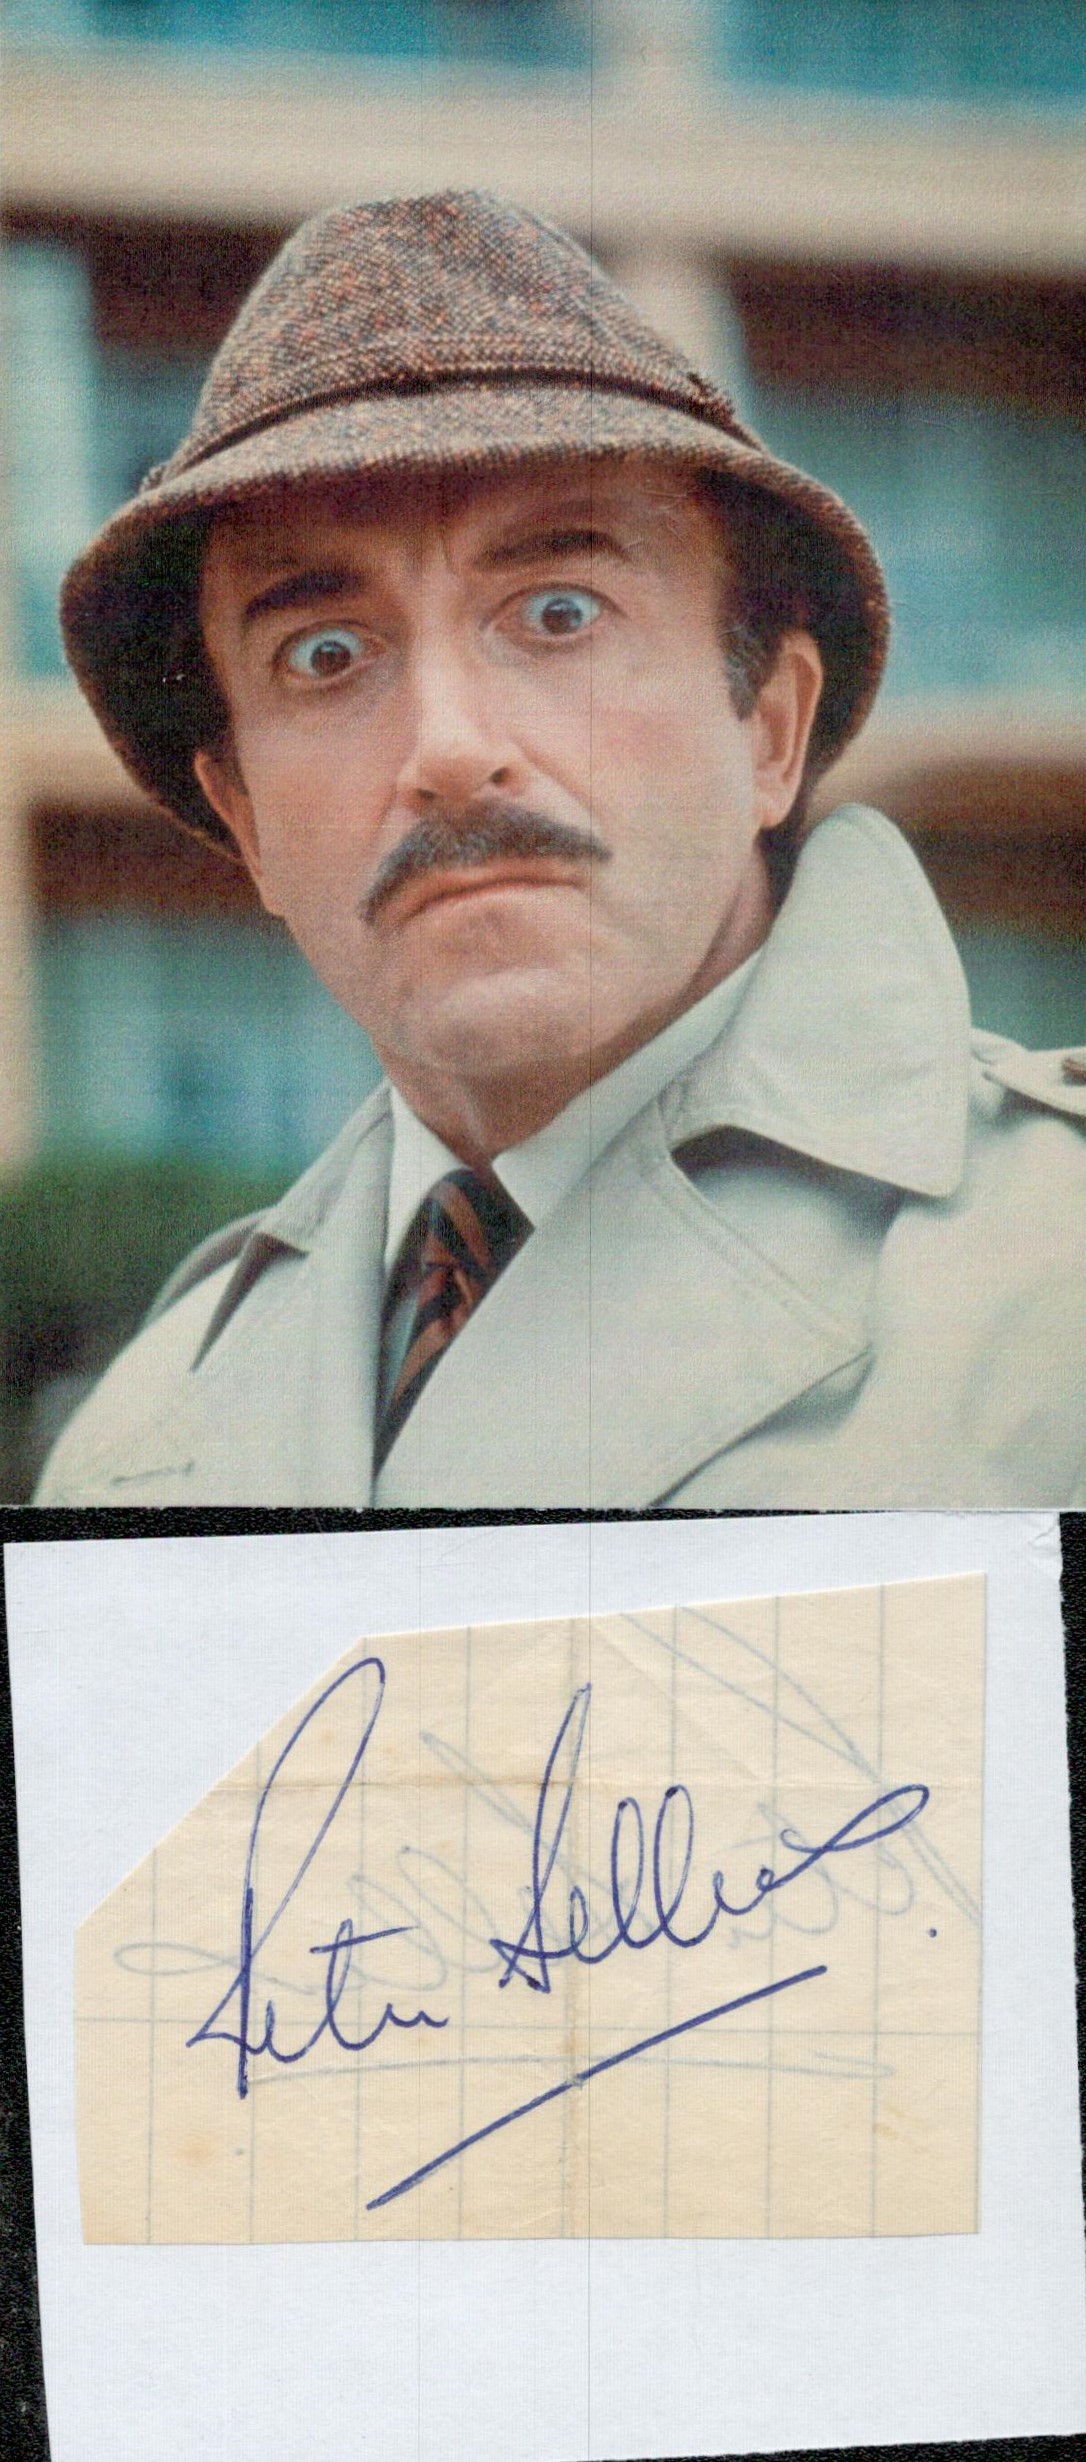 Peter Sellers 3x3 inch signed page cutting and 5x4 inch Inspector Closeau colour magazine photo.